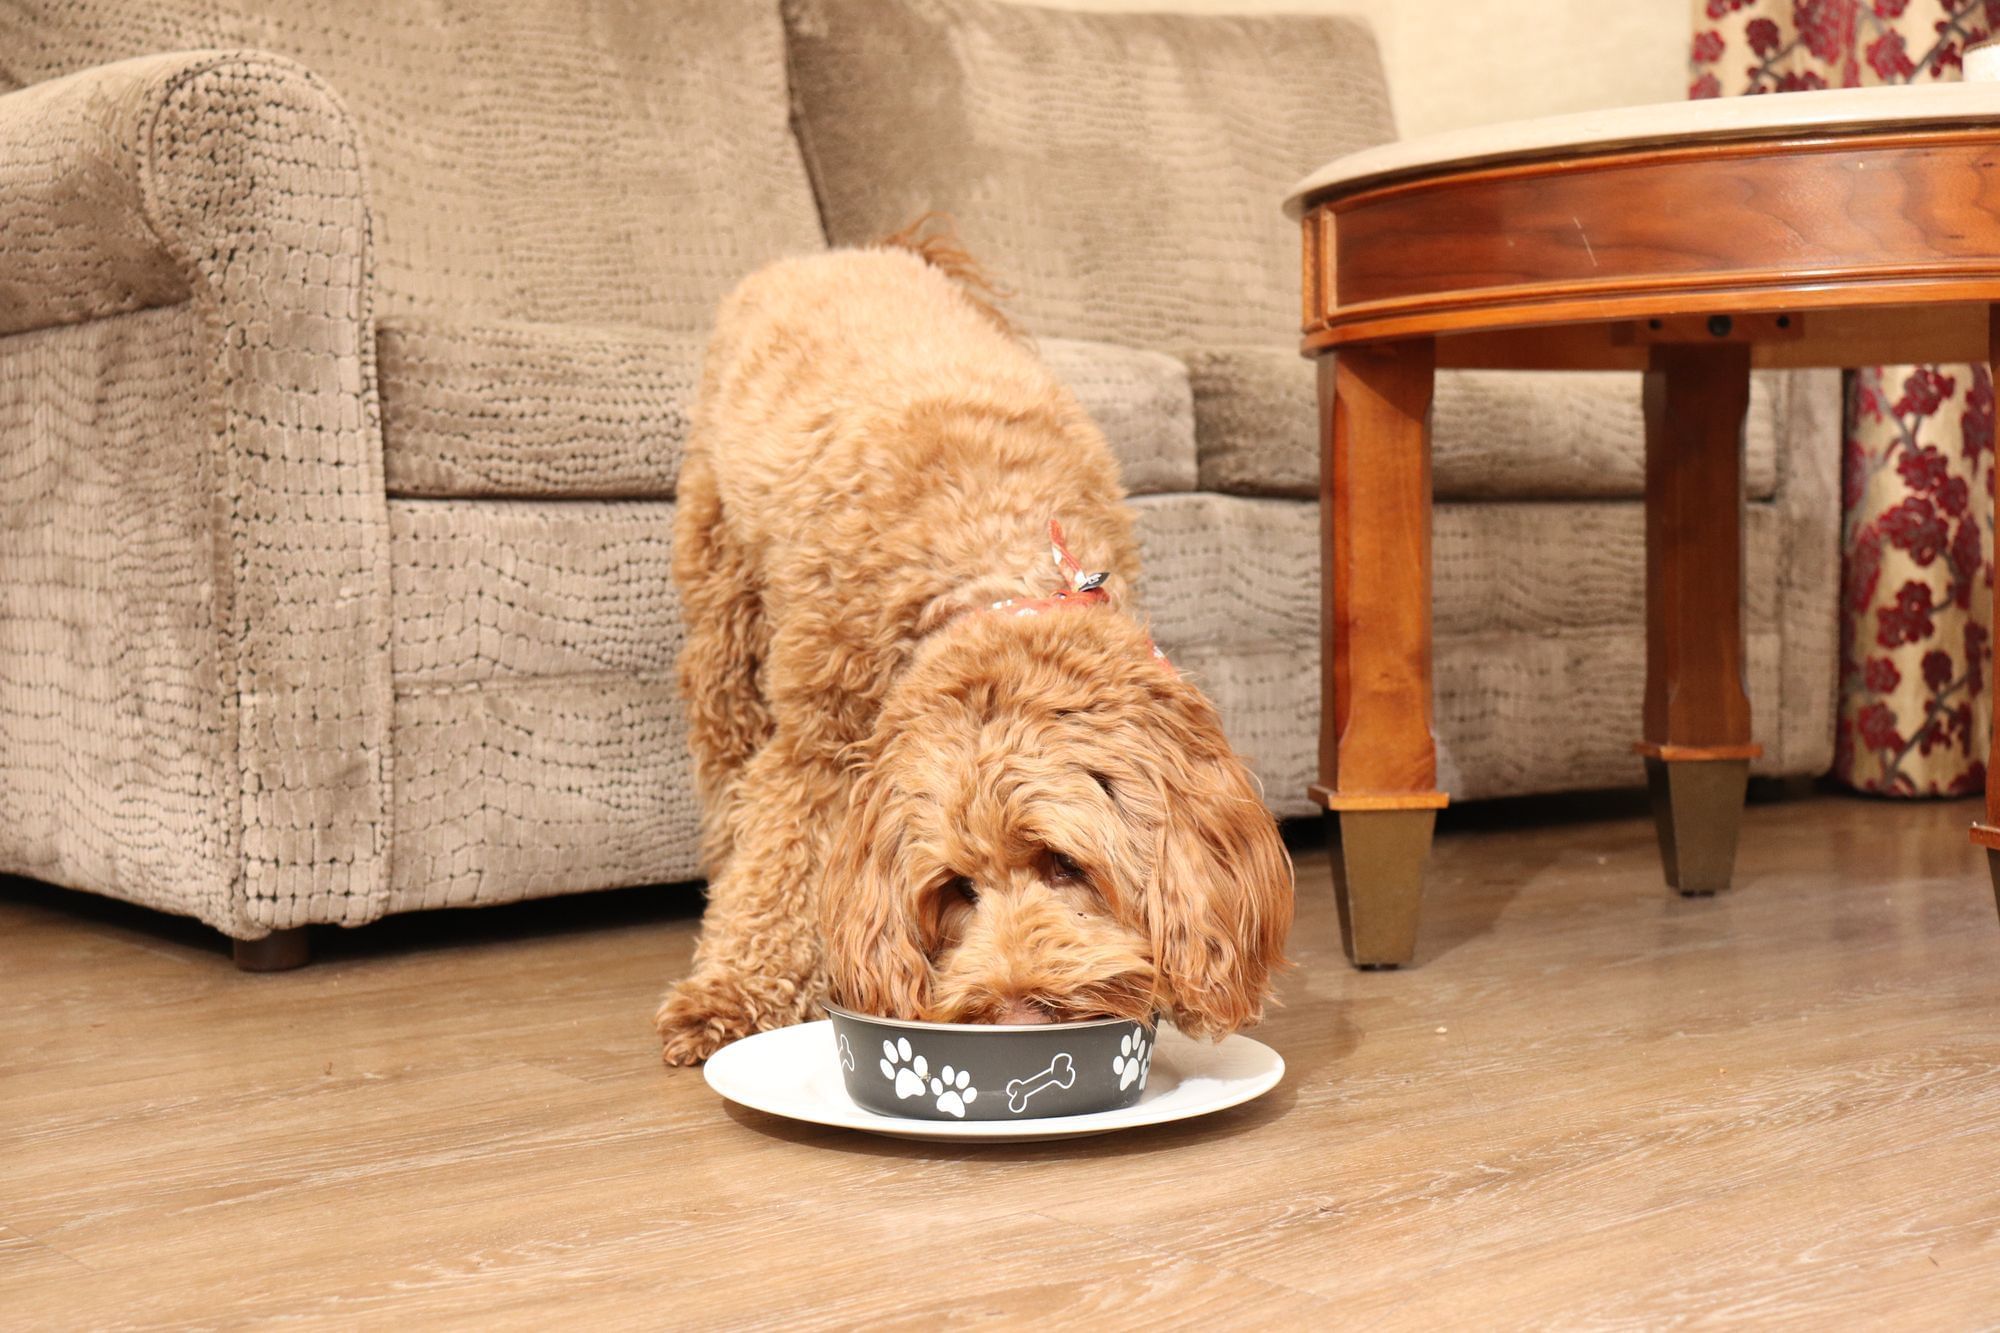 Labradoodle dog eating out of doggie bowl